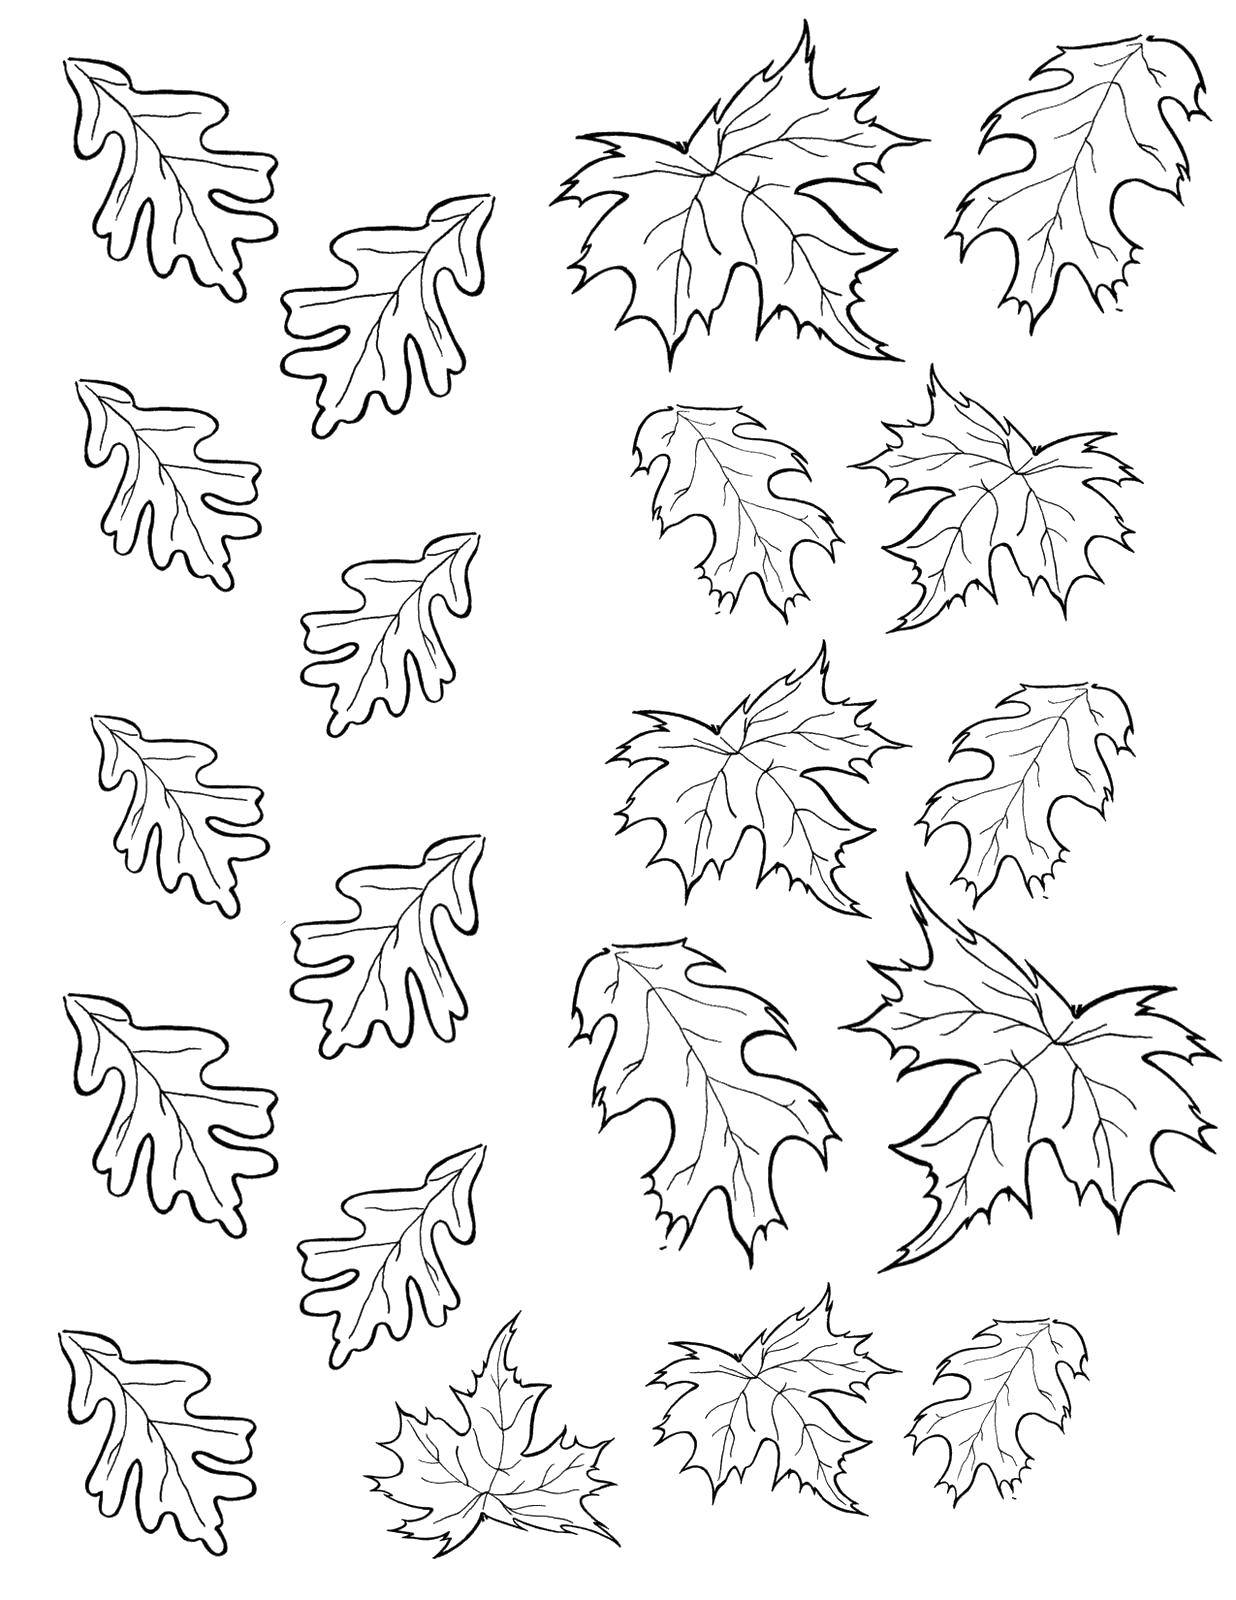 Coloring Oak leaves, maple leaves. Category The contours of the leaves. Tags:  Leaves, tree.